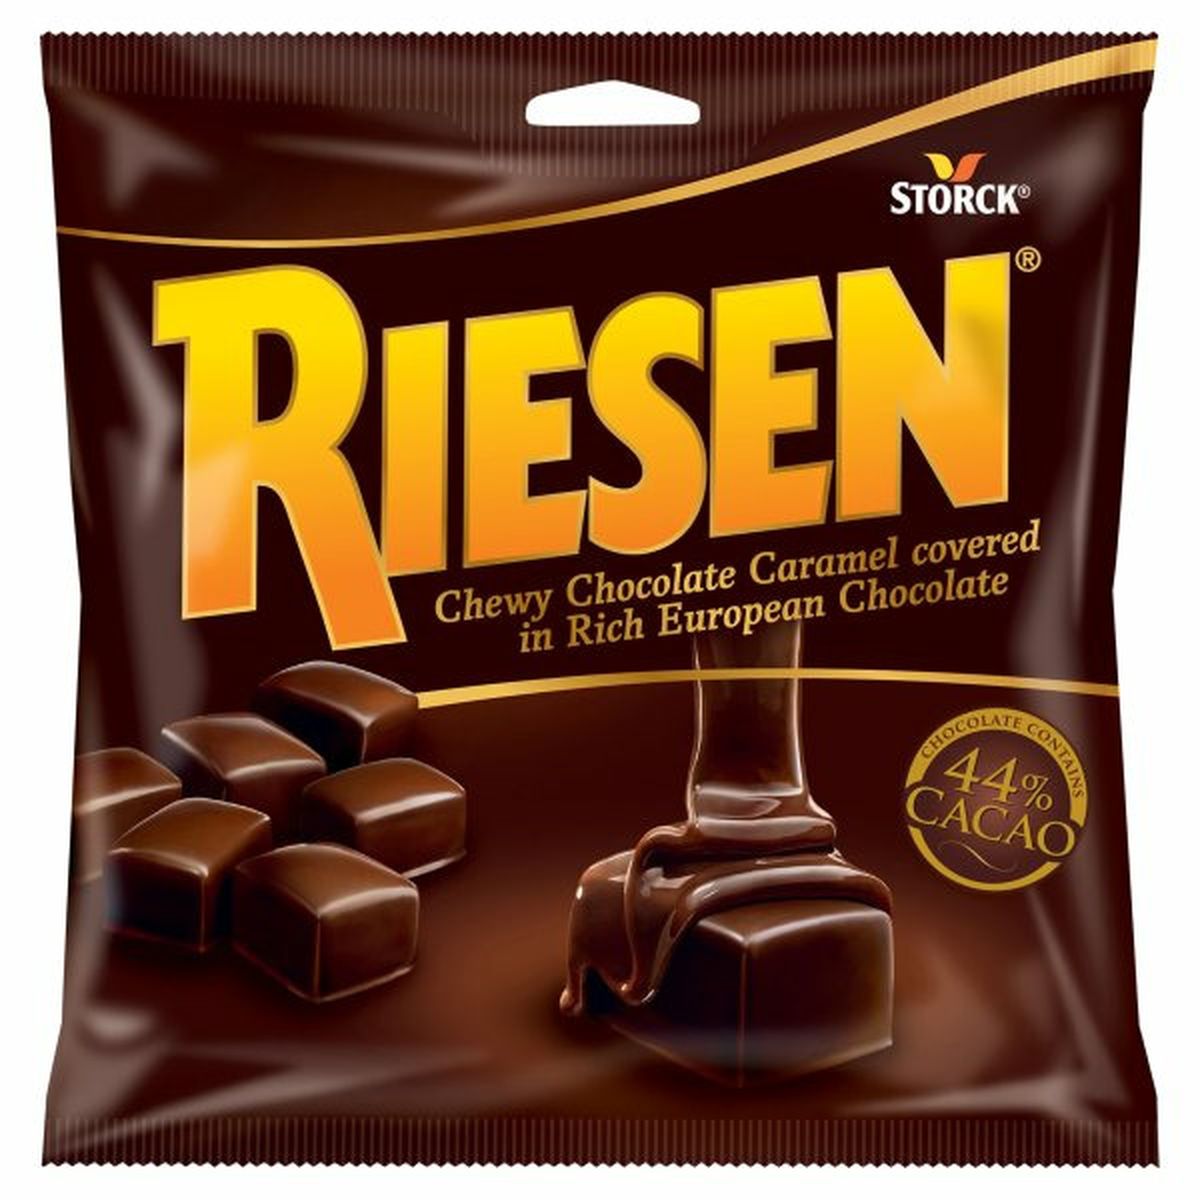 Calories in RIESEN Chewy Chocolate Caramel